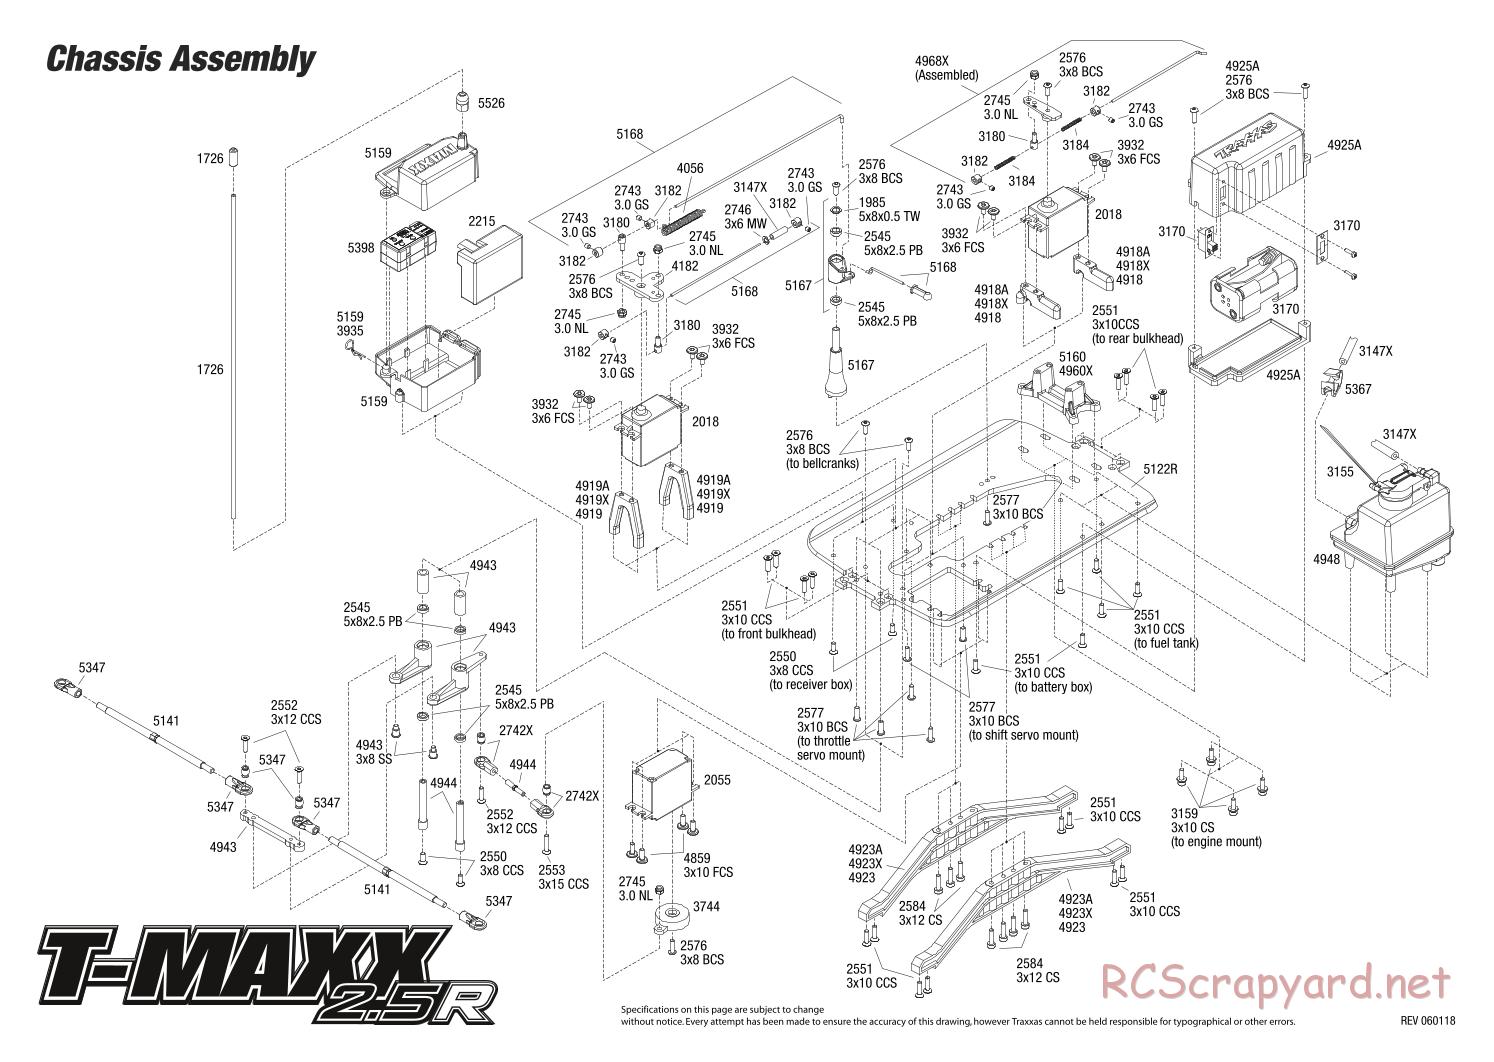 Traxxas - T-Maxx 2.5R (2006) - Exploded Views - Page 1